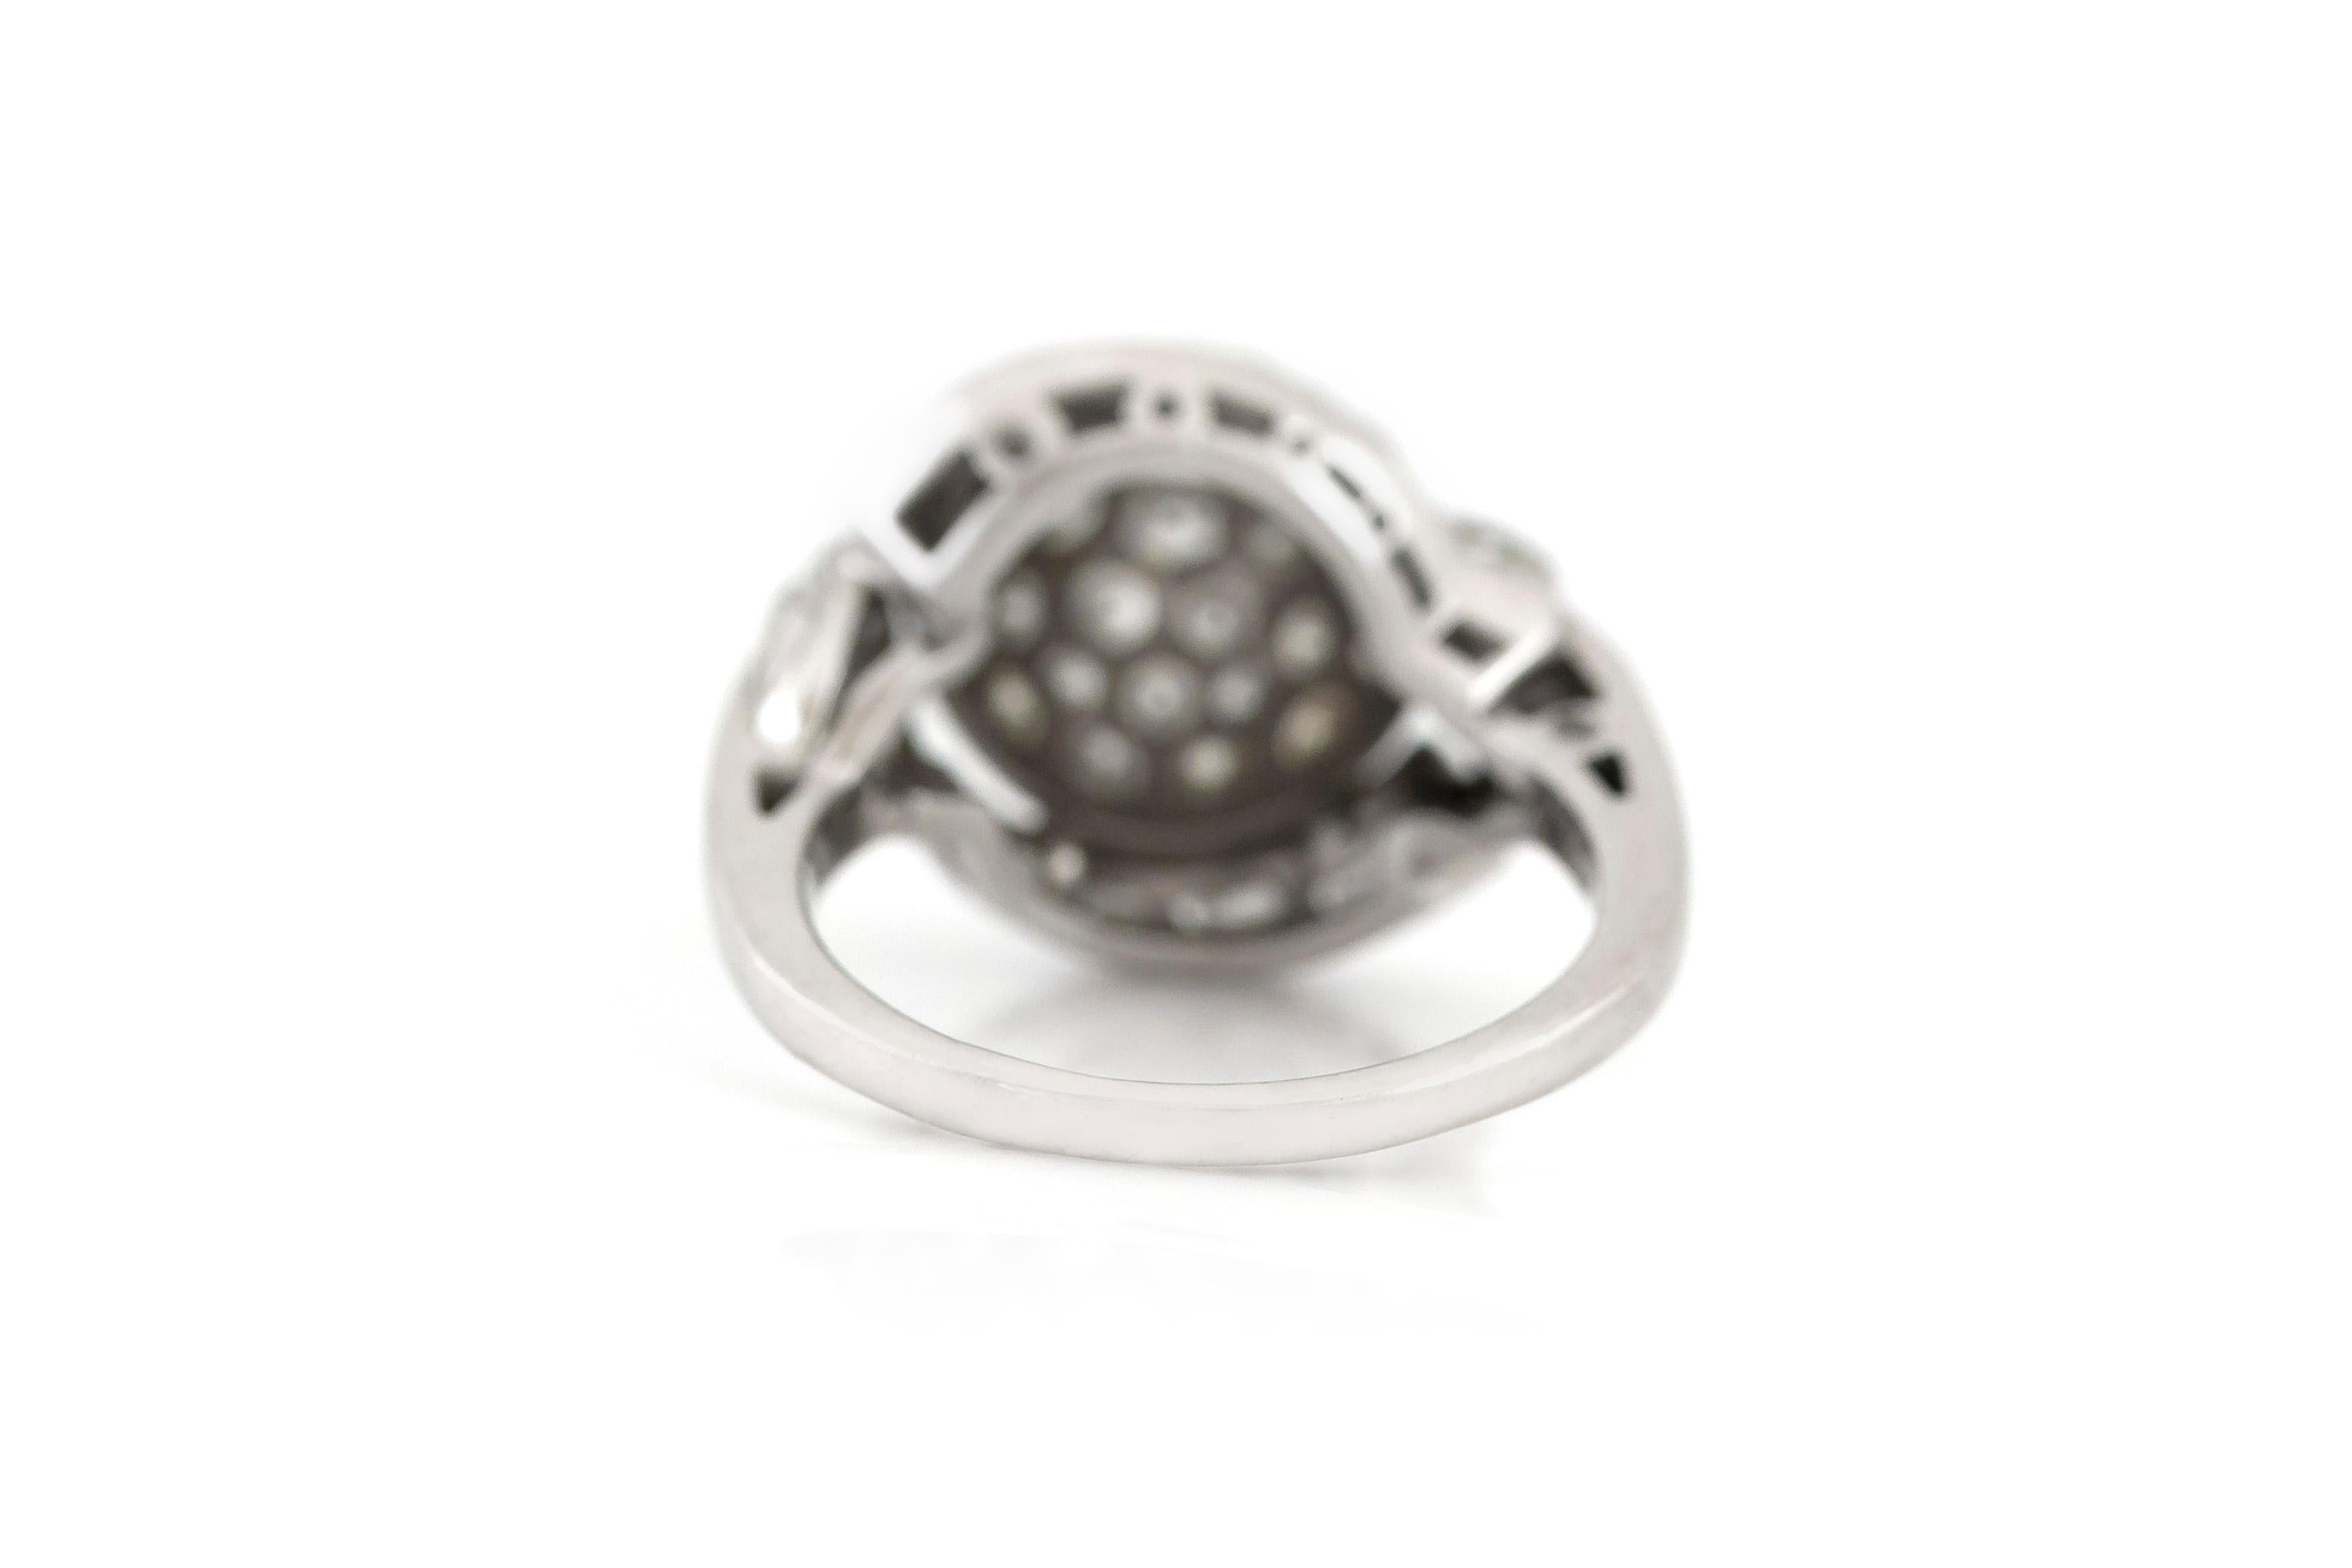 The ring is finely crafted in platinum and diamonds weighing approximately total of 3.00 carat.